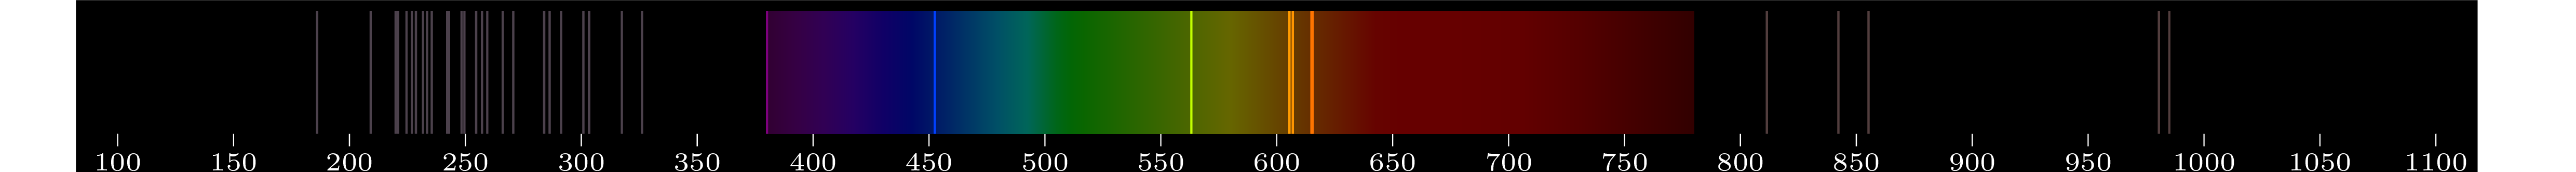 emmision spectra of element Sn